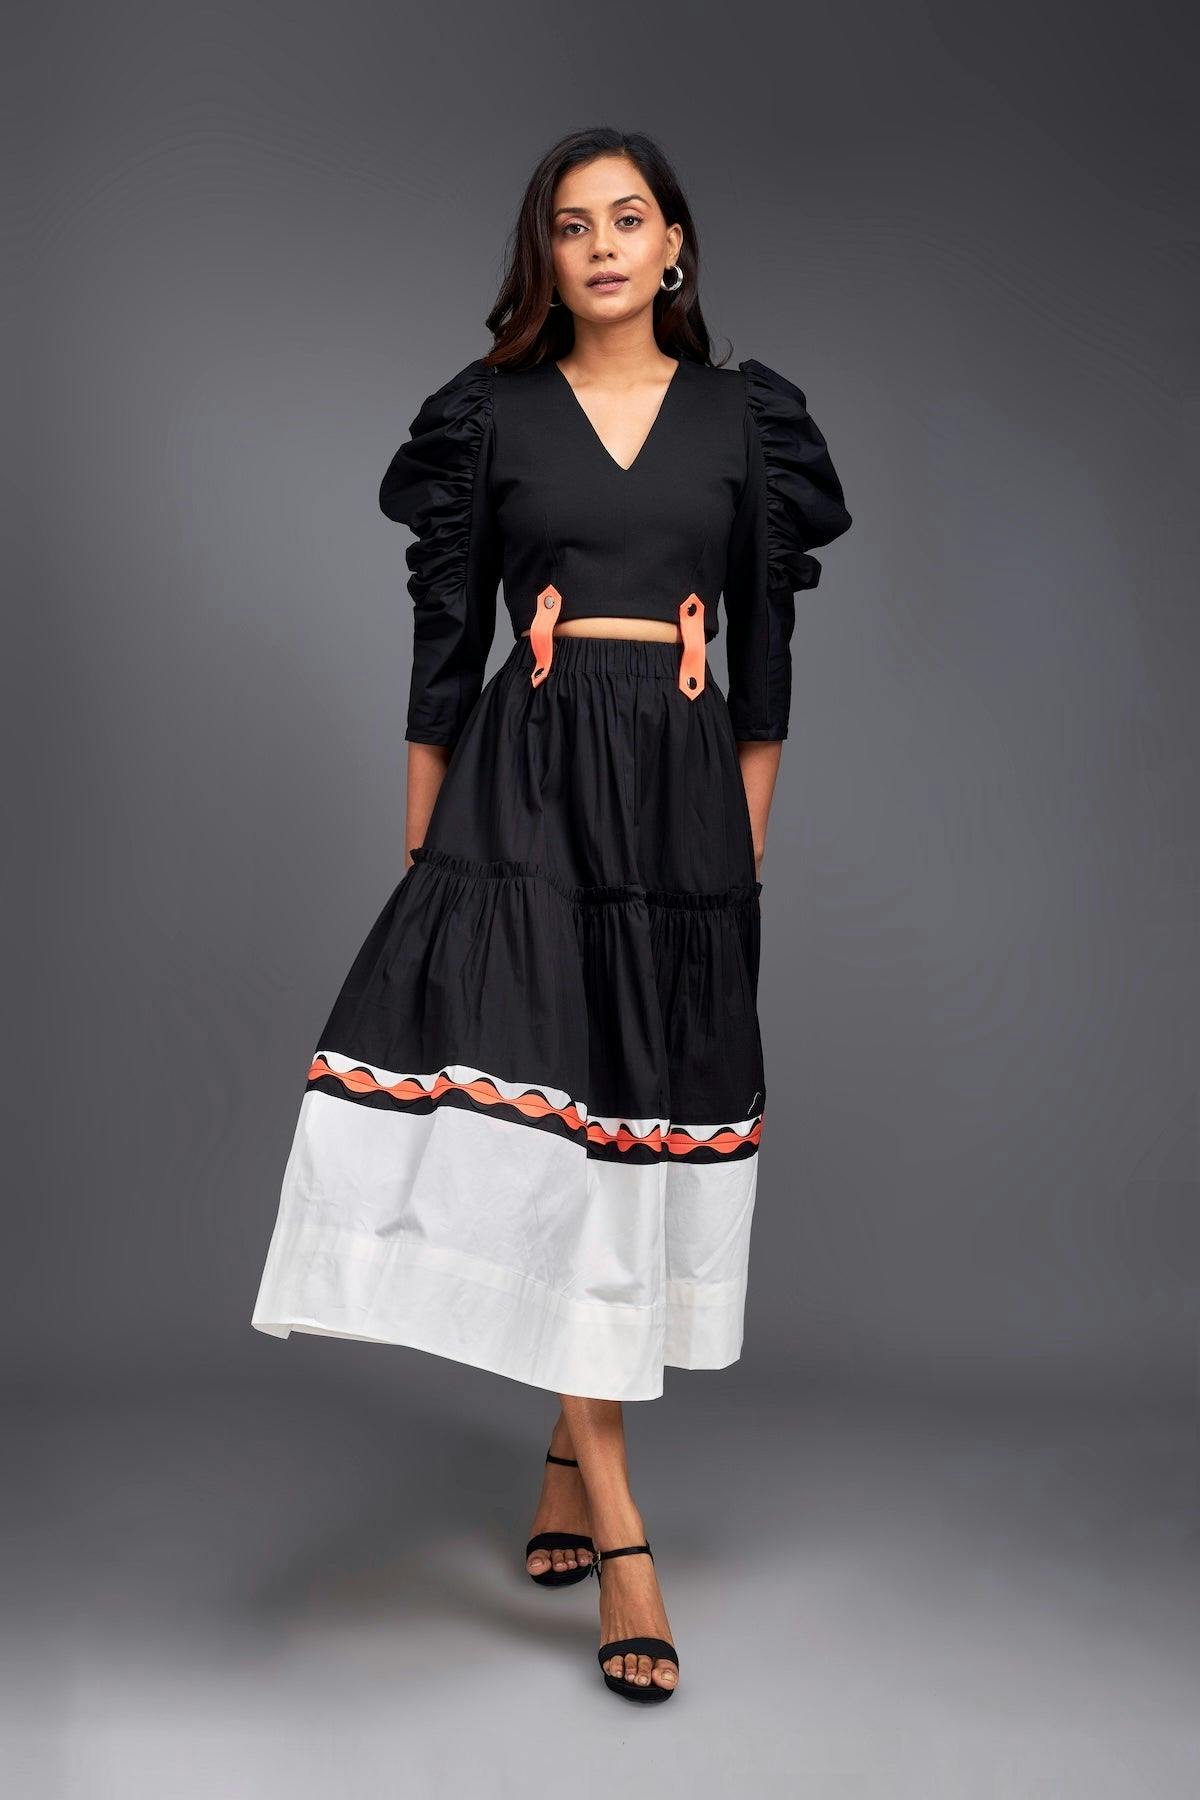 Black & White Colour Block Flared Bottom Skirt & Top With Neon Elements, a product by Deepika Arora